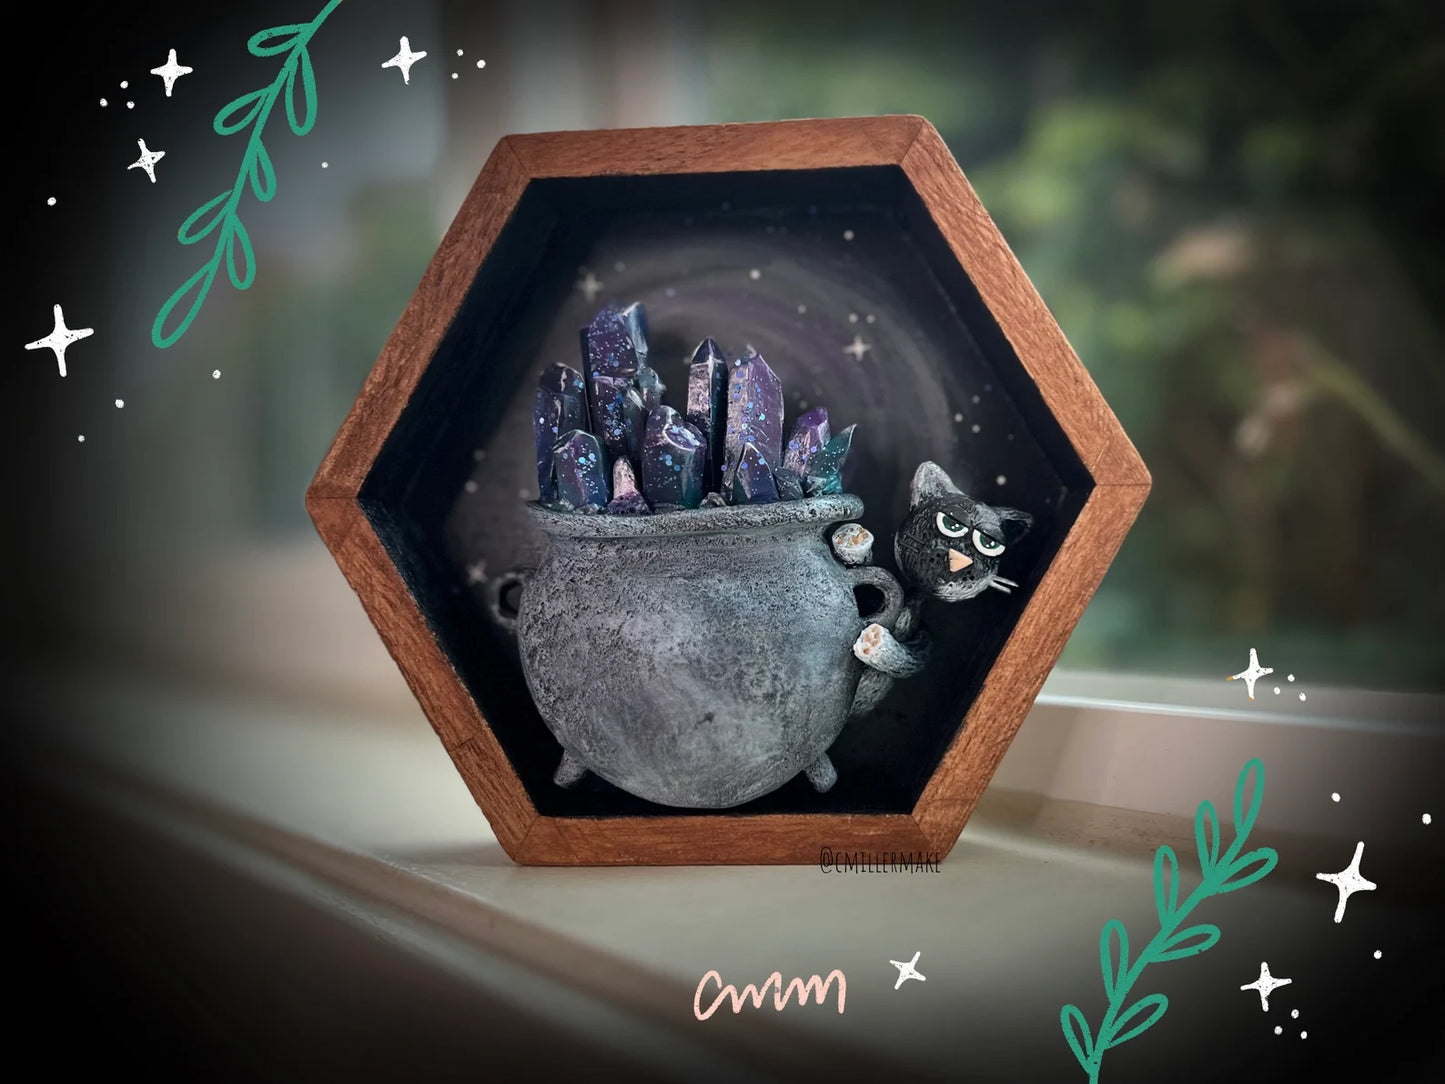 Cat & Crystal Cauldron Shadow Box | Fluorite Crystal and Cat Mini Sculpture | Witchy Wall Hanging or Desk Decor | Spooky Shadowbox